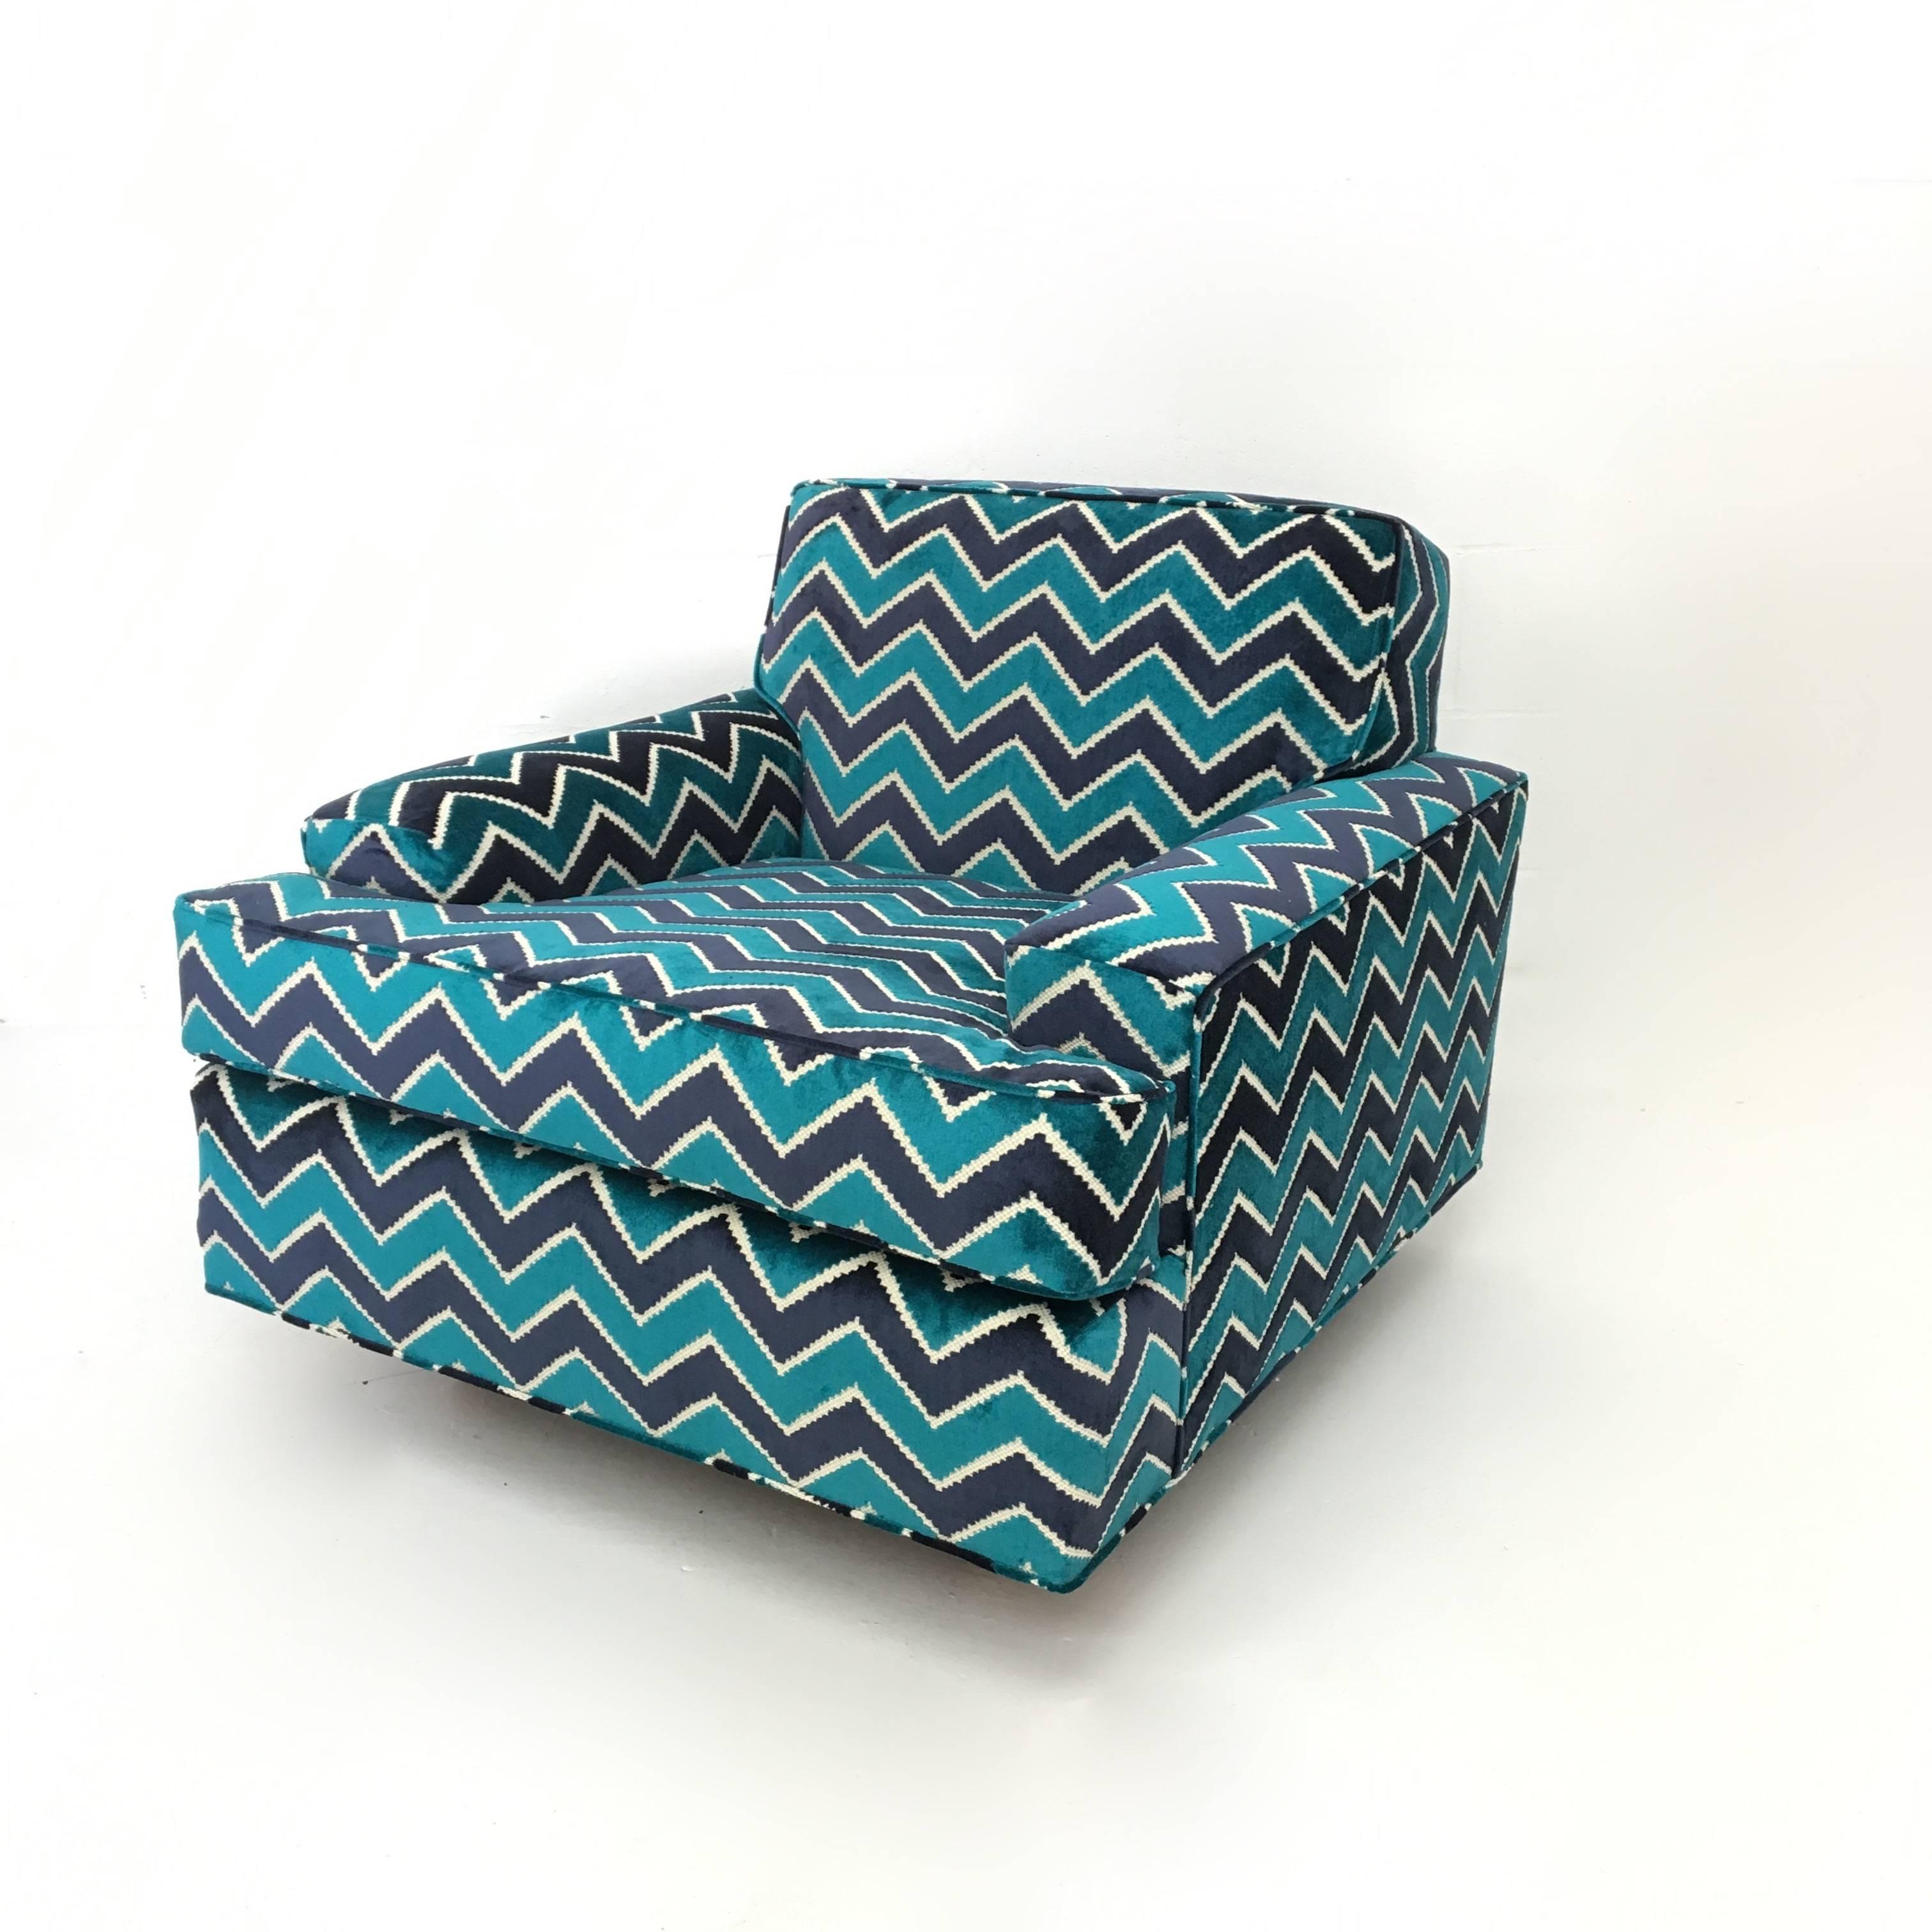 Mid-Century Modern retro zig zag pattern newly upholstered lounge chair in turquoise and navy.